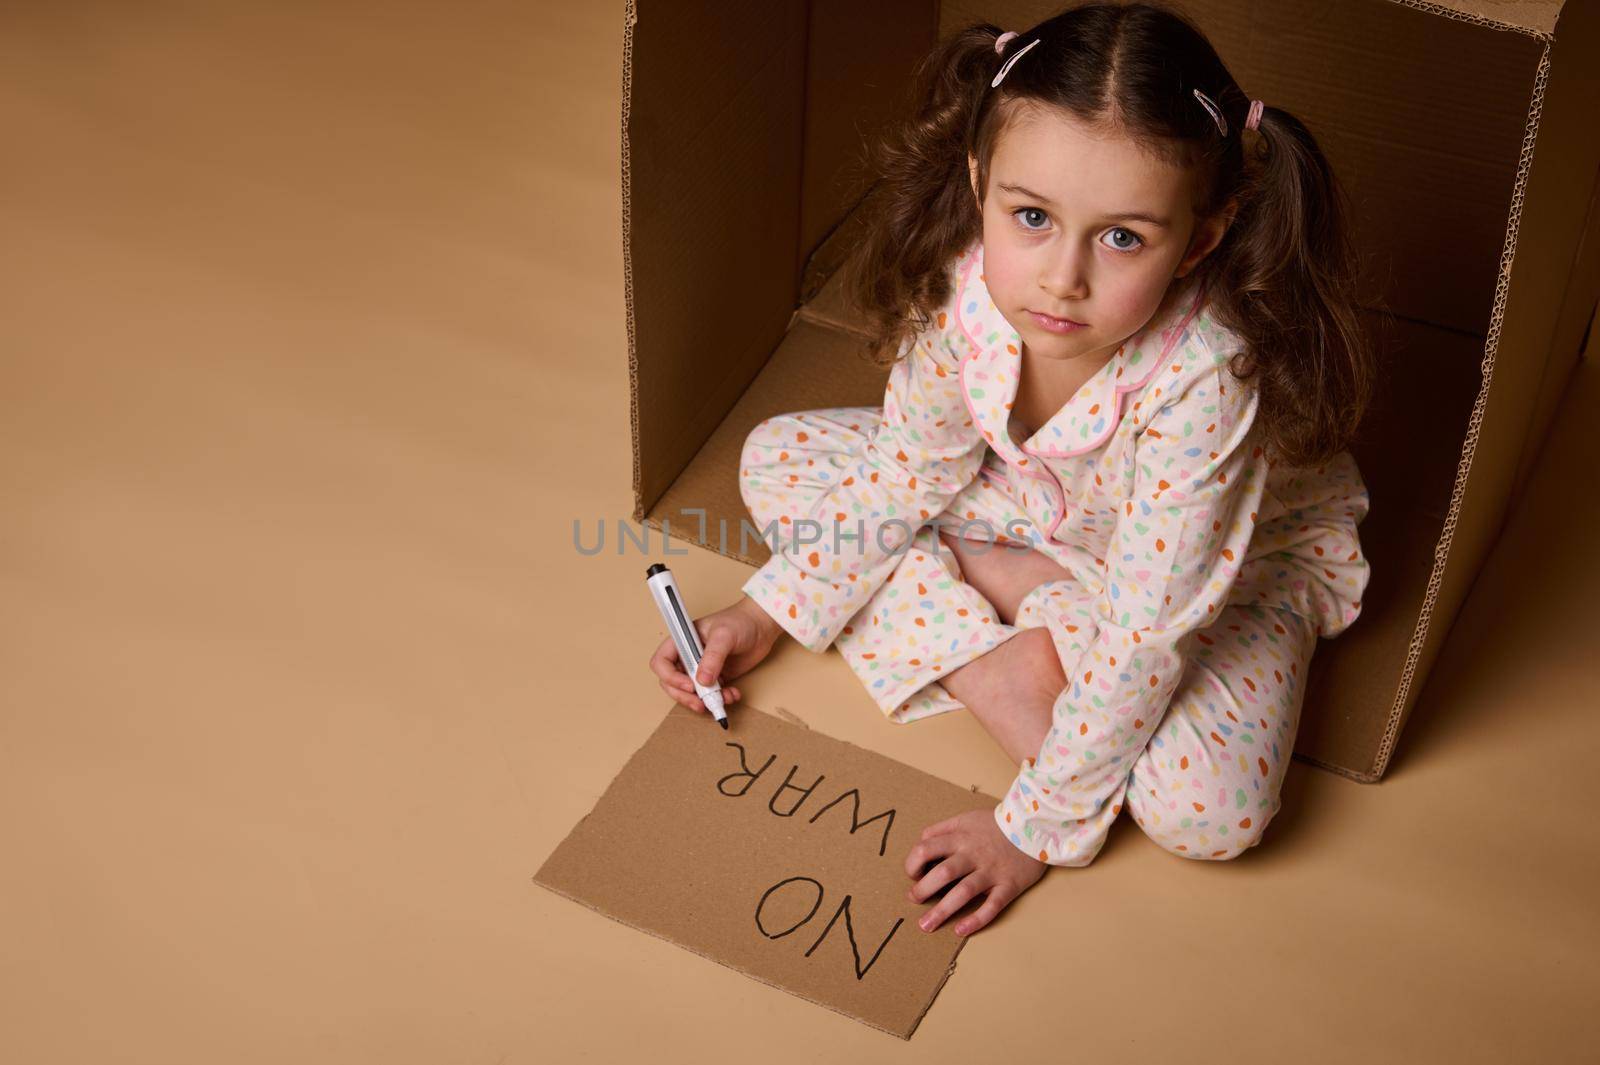 Top view little girl in pajamas writing No War on poster while sitting inside cardboard box, hiding from military and political conflict. Concept of refugees, immigrants losing their home during war by artgf